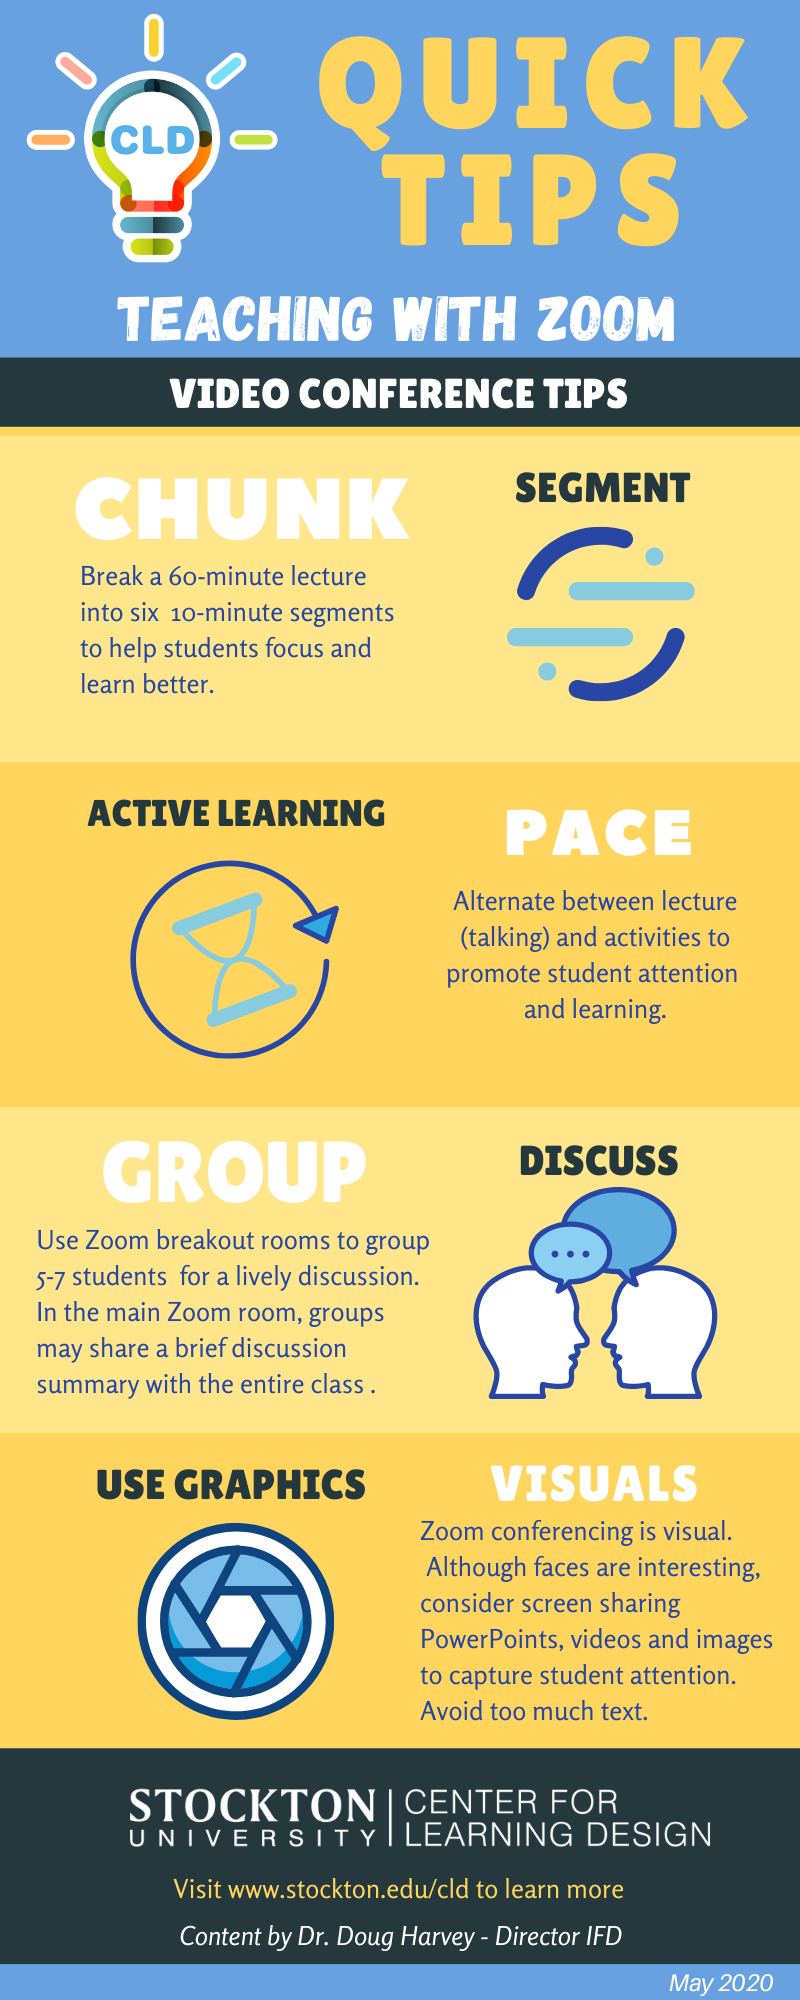 Quick Tips Teaching with Zoom